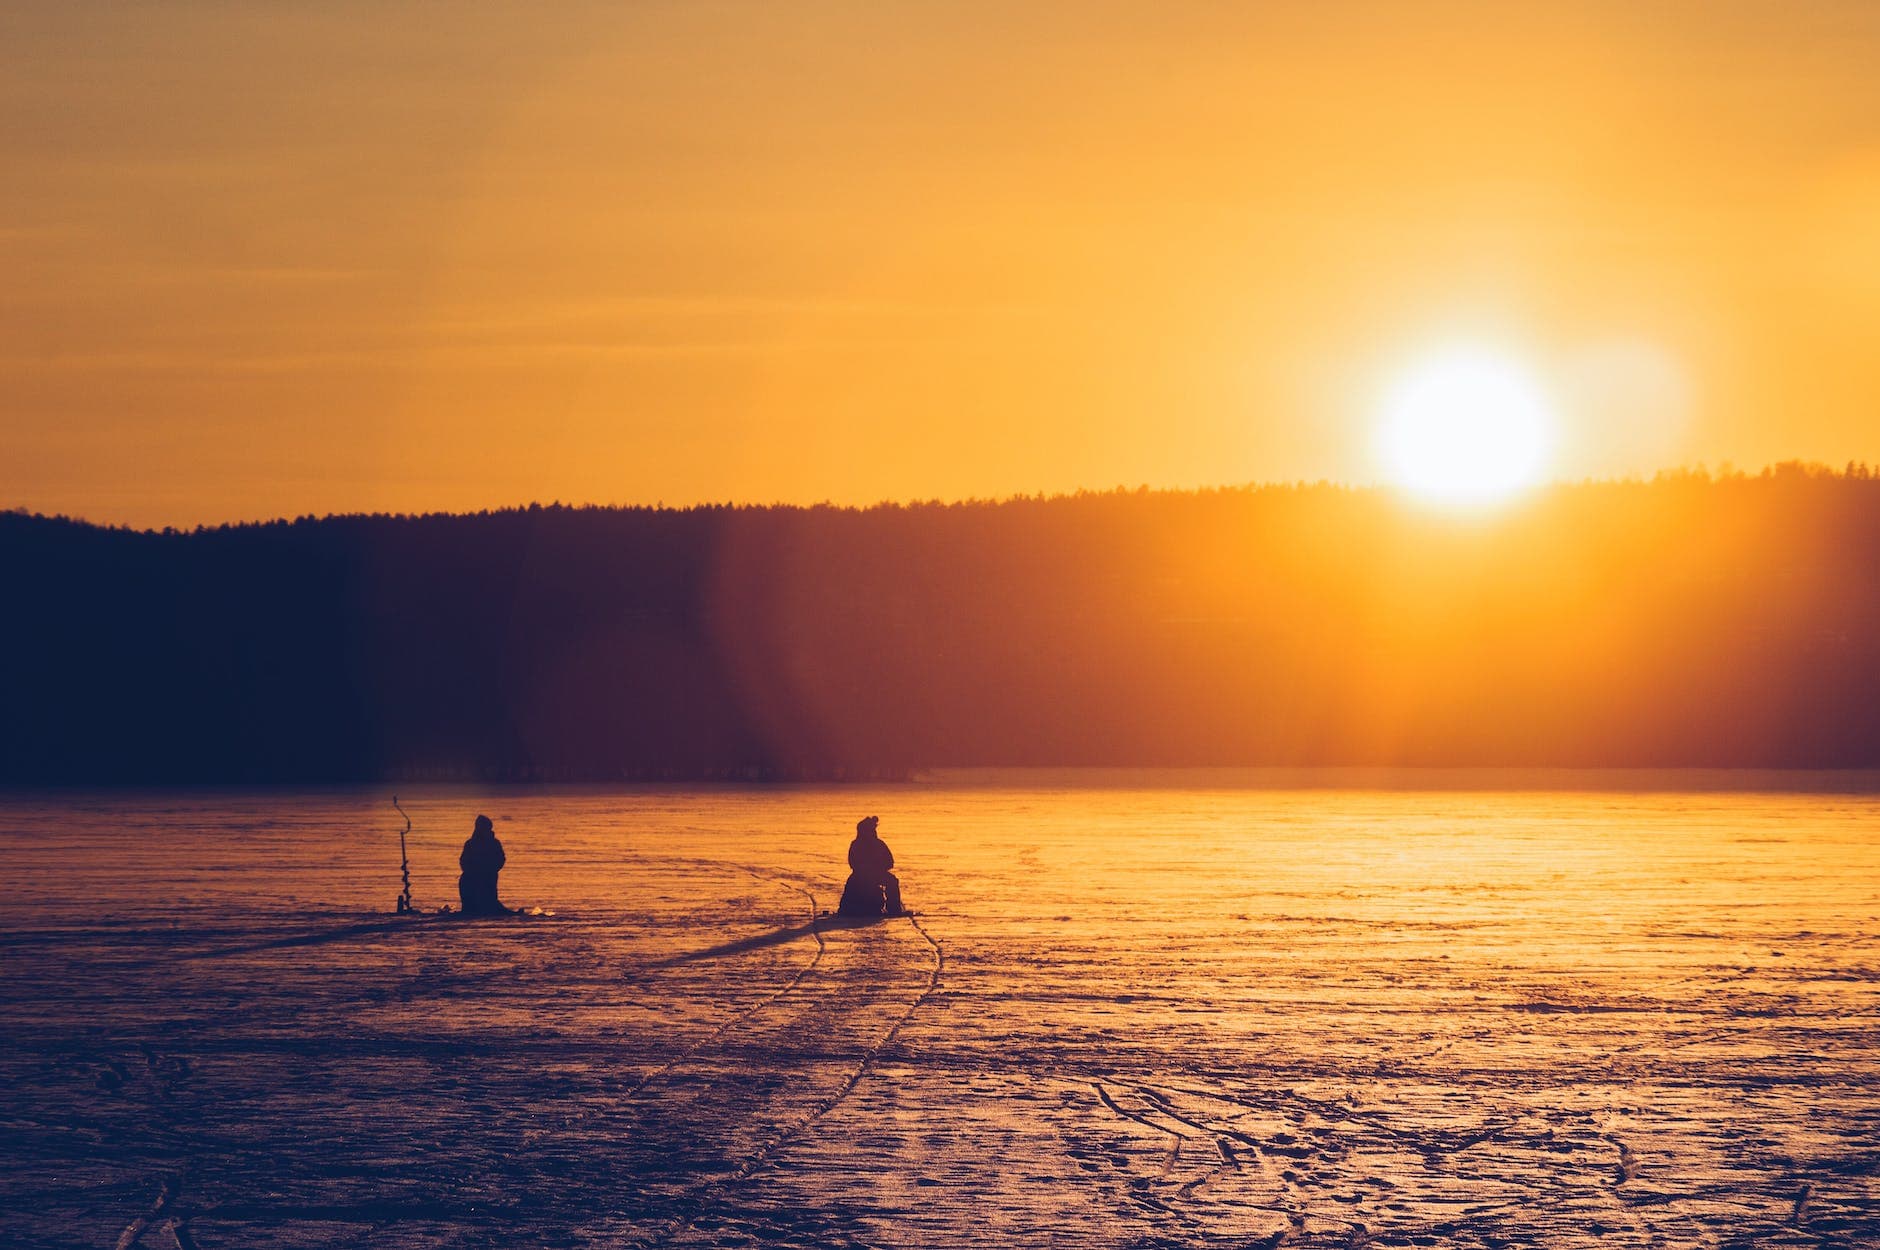 silhouette of two persons sitting while ice fishing on an iced covered body of water at dawn